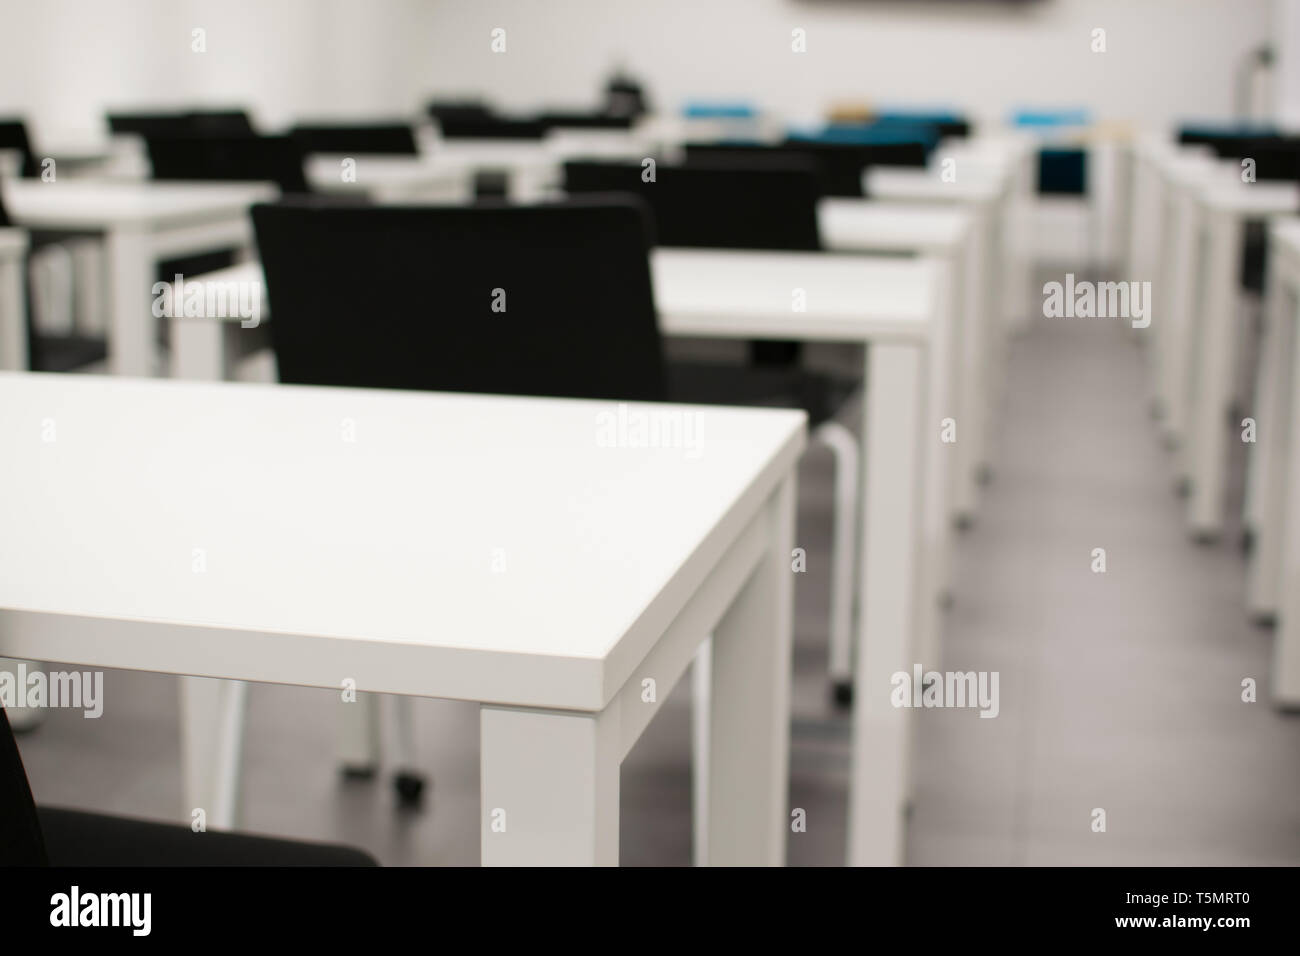 Classroom empty. High school or university desk or table and chairs in a row. Exam test room Stock Photo